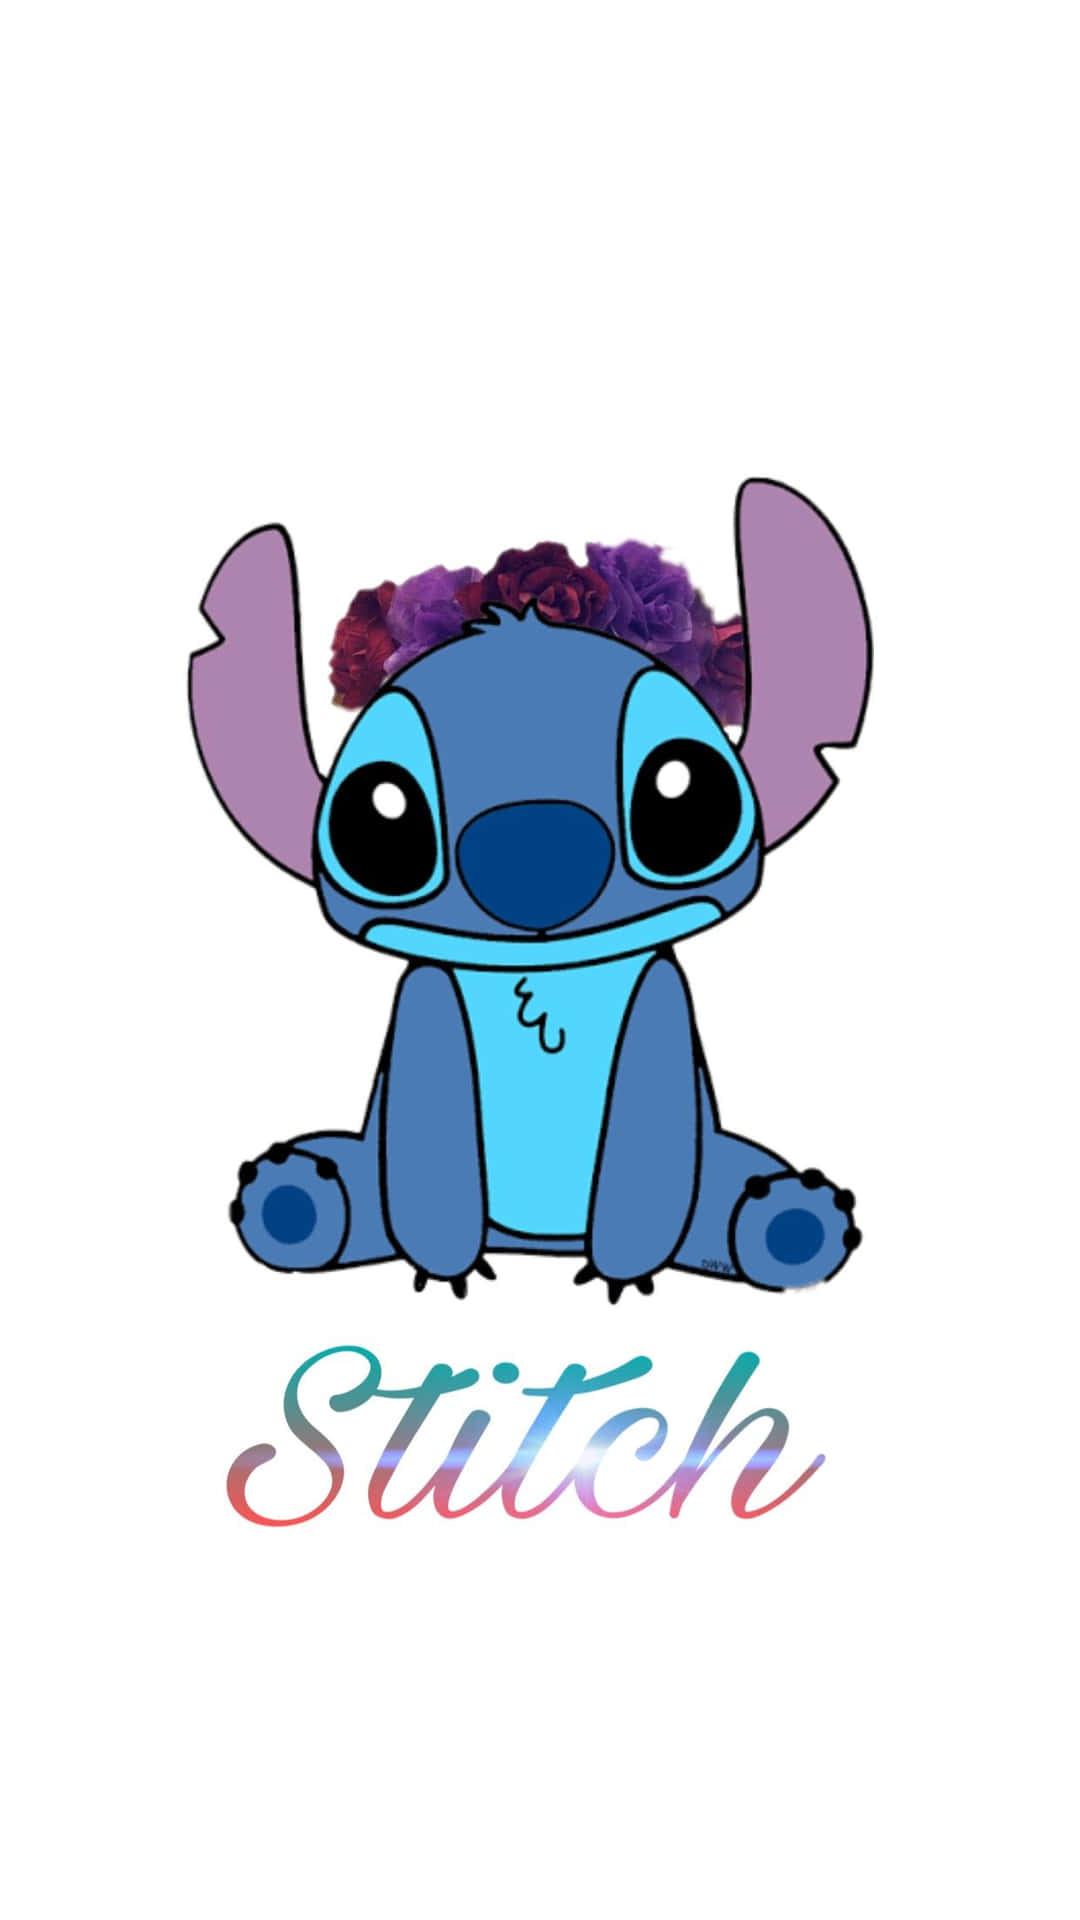 Lovely Stitch Relaxing On A Hammock Under The Night Sky